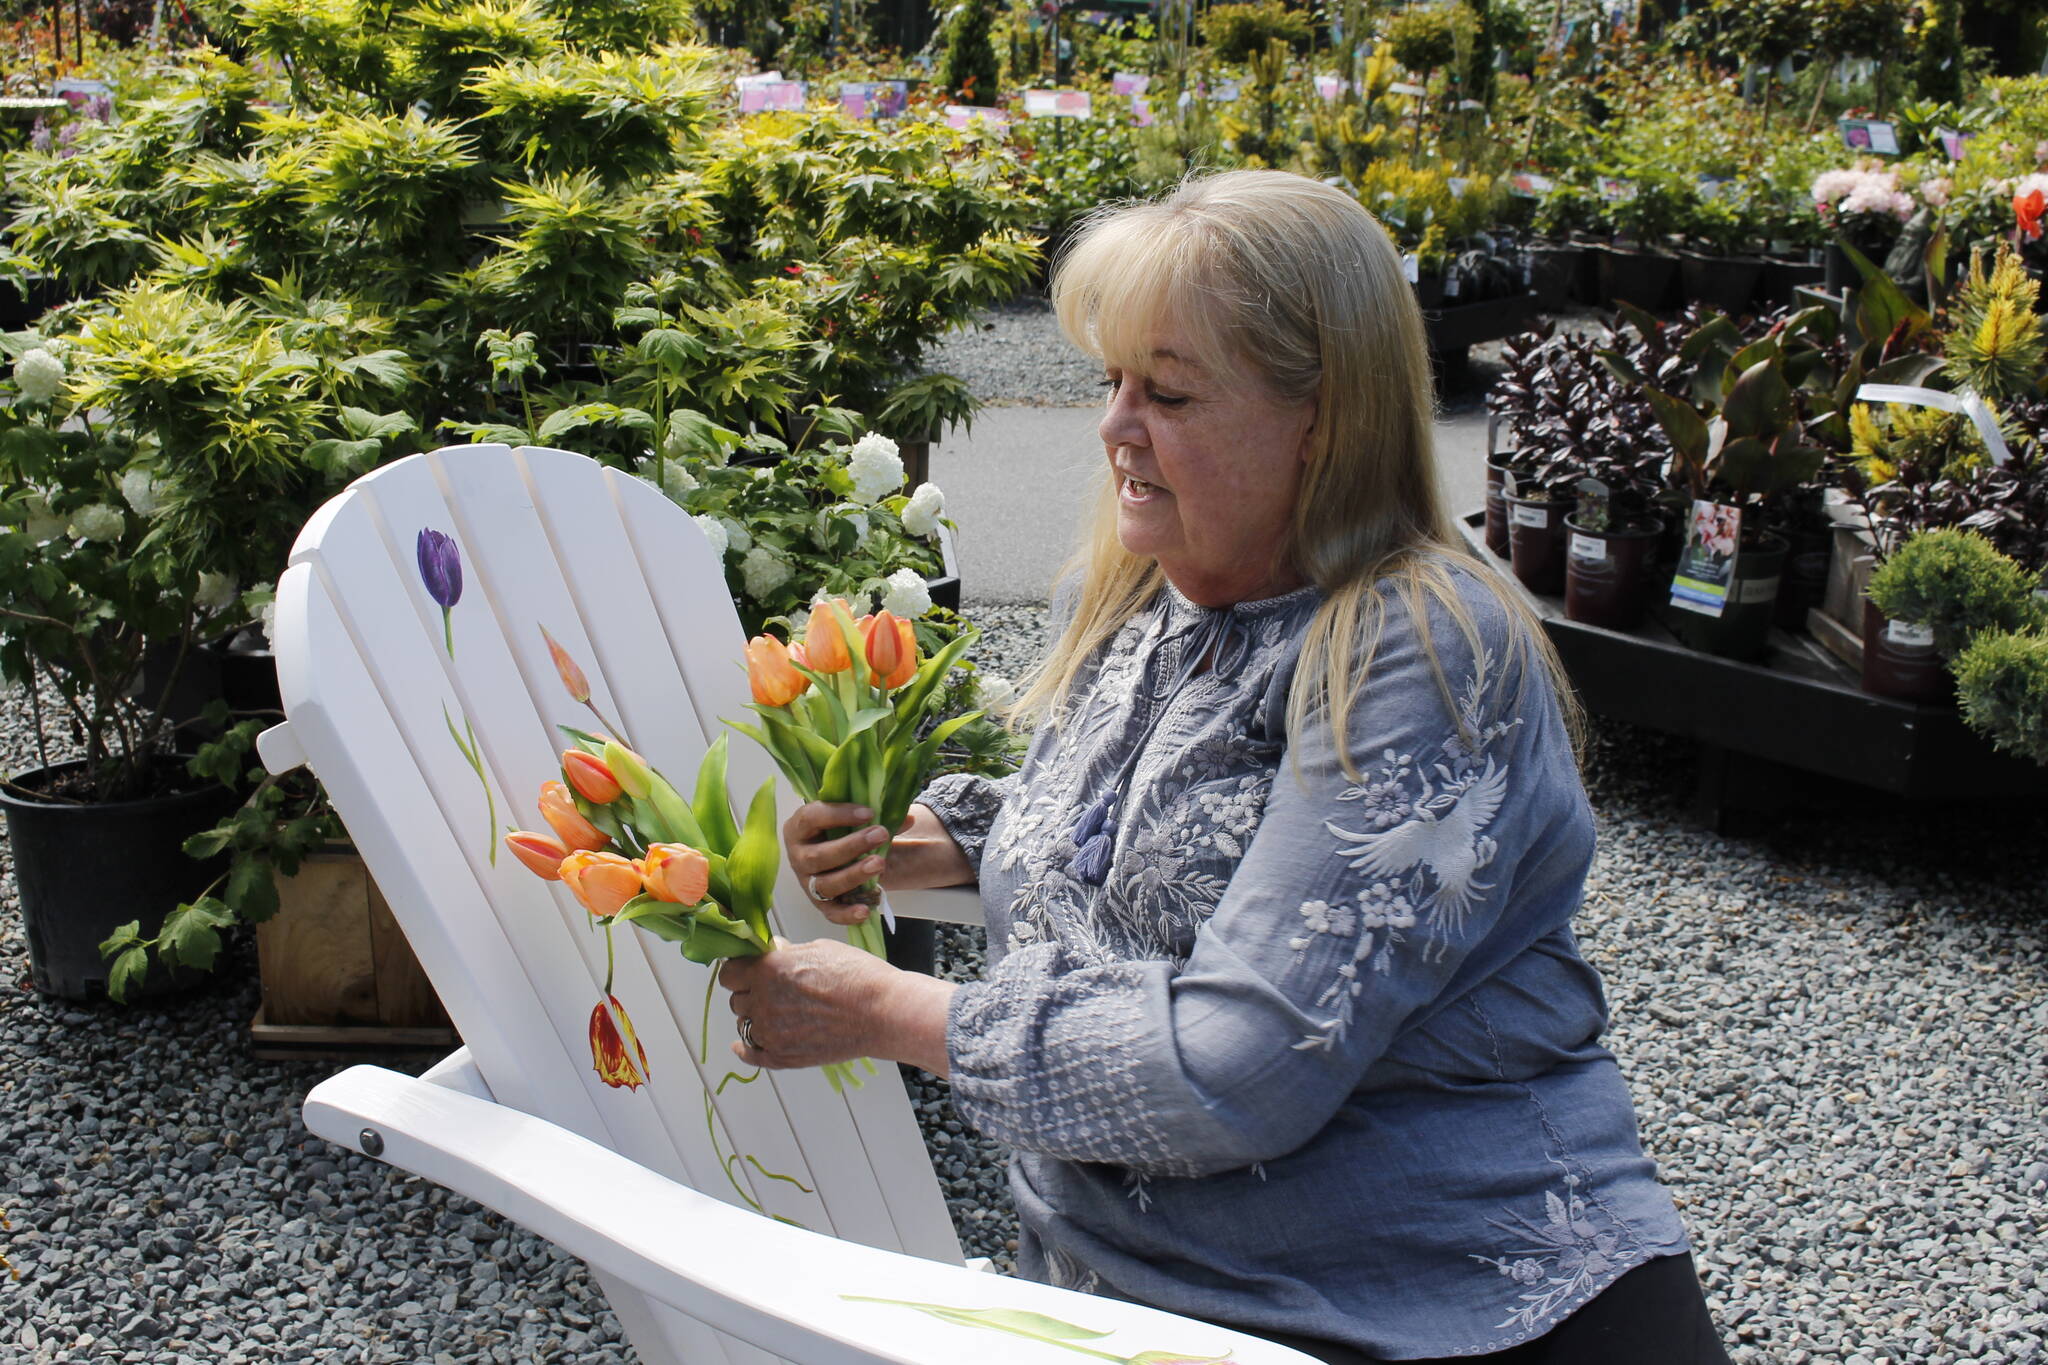 Photo by Kira Erickson/South Whidbey Record
Deborah Montgomerie traces a tulip painted on her chair, which is titled “Tulip Mania” after a period in history where prices of tulip bulbs soared in Holland.